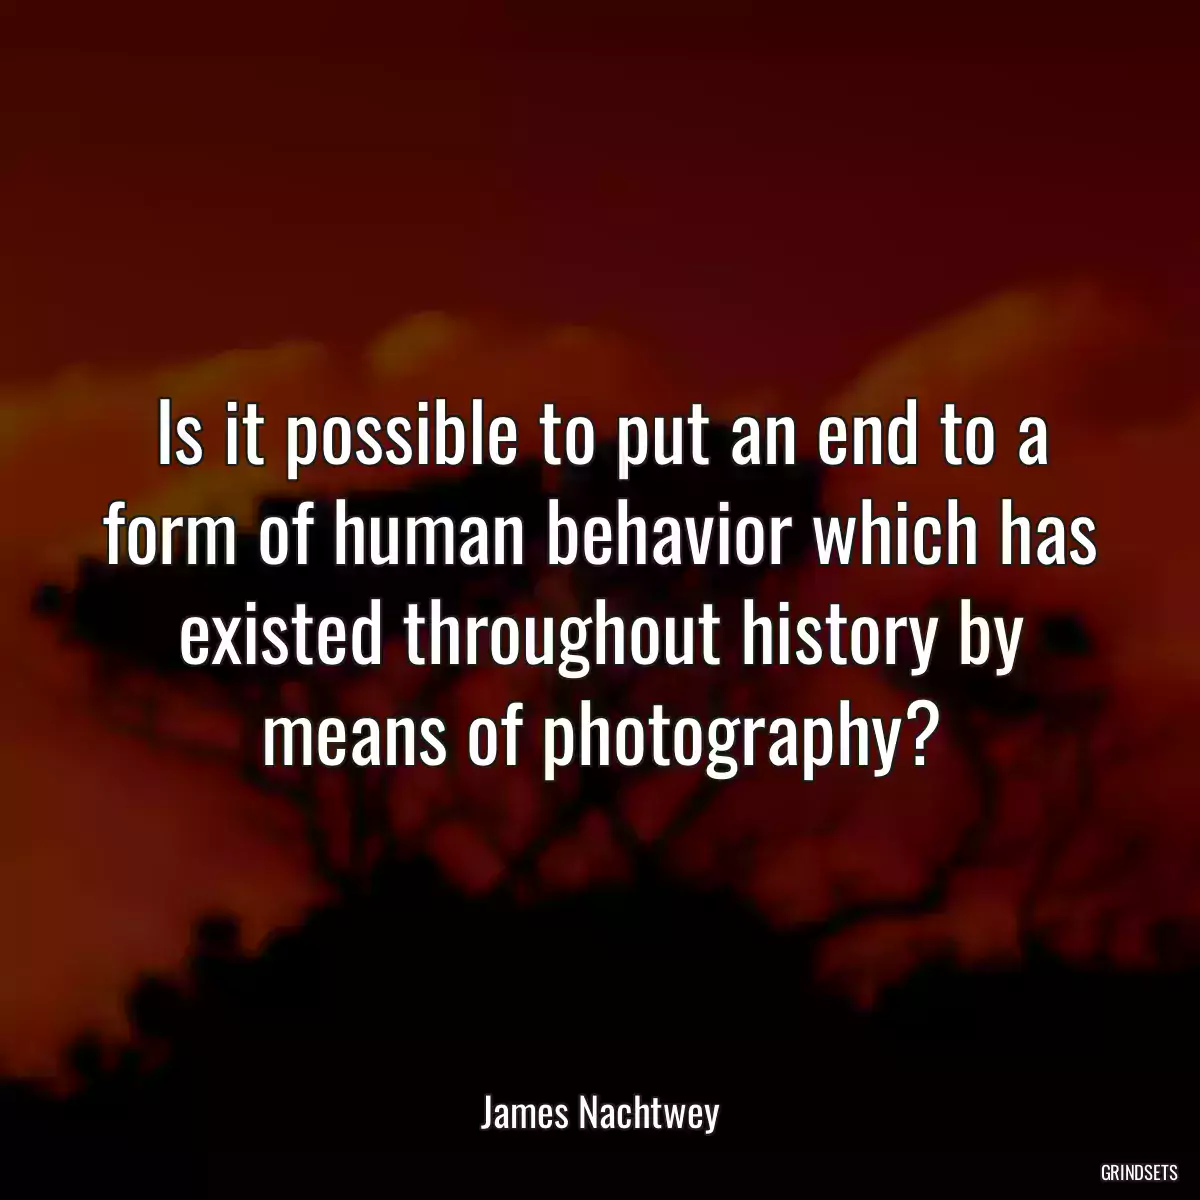 Is it possible to put an end to a form of human behavior which has existed throughout history by means of photography?